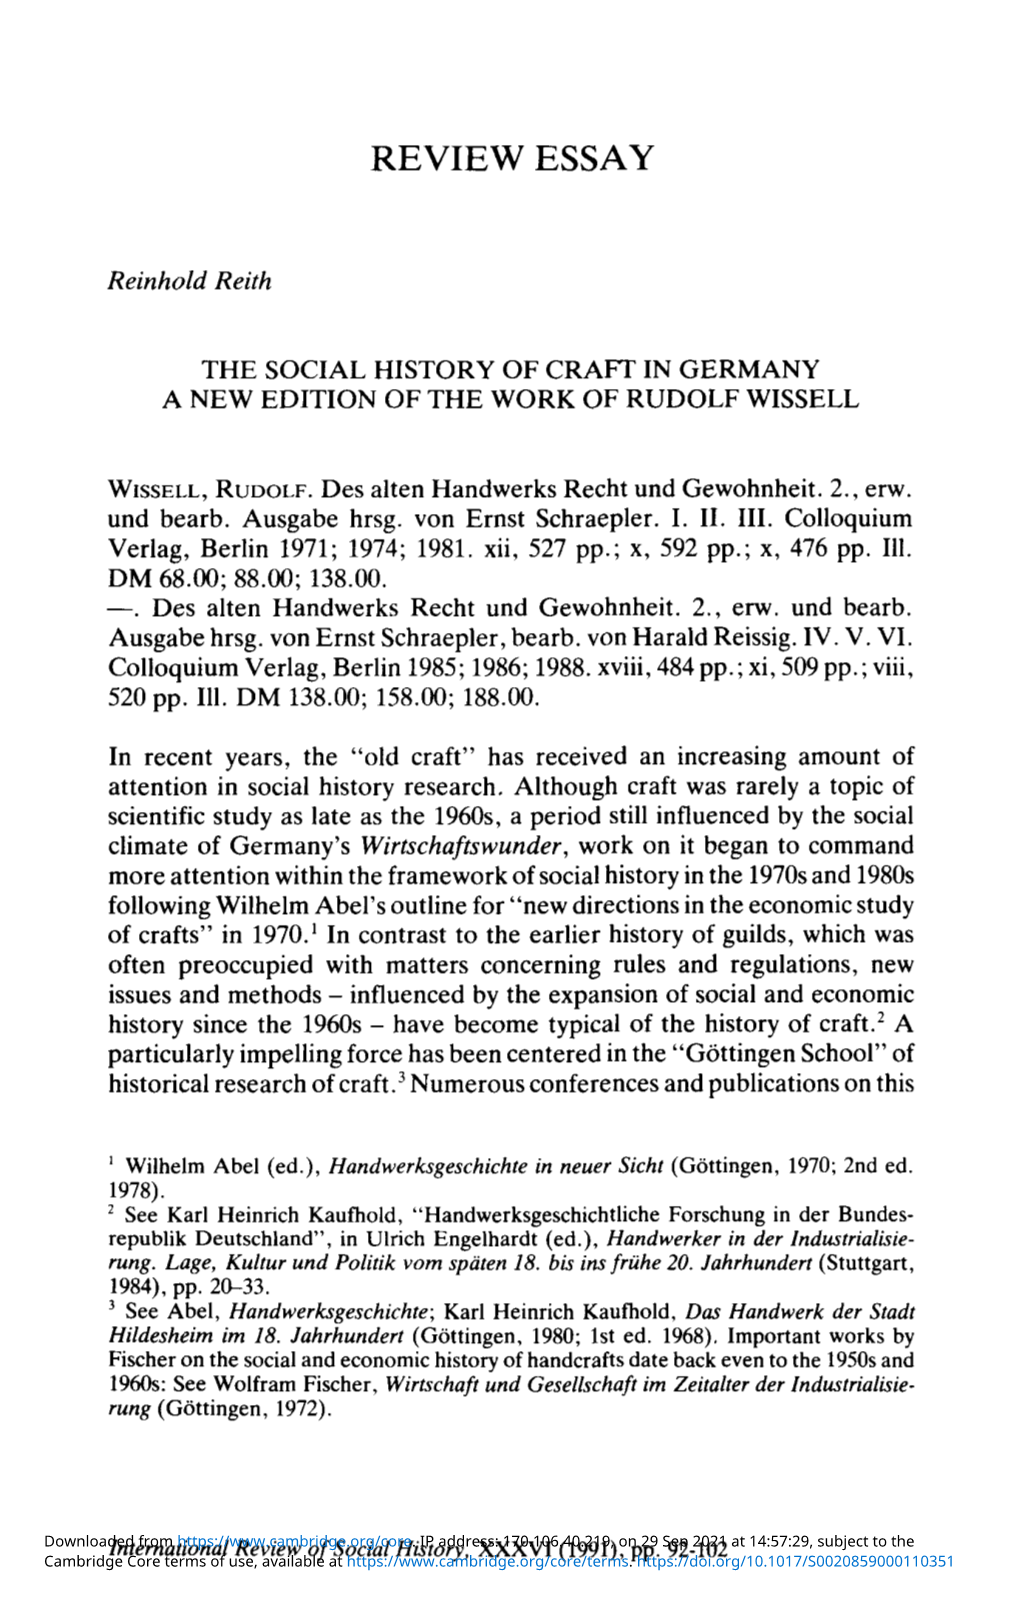 The Social History of Craft in Germany. a New Edition of the Work Of